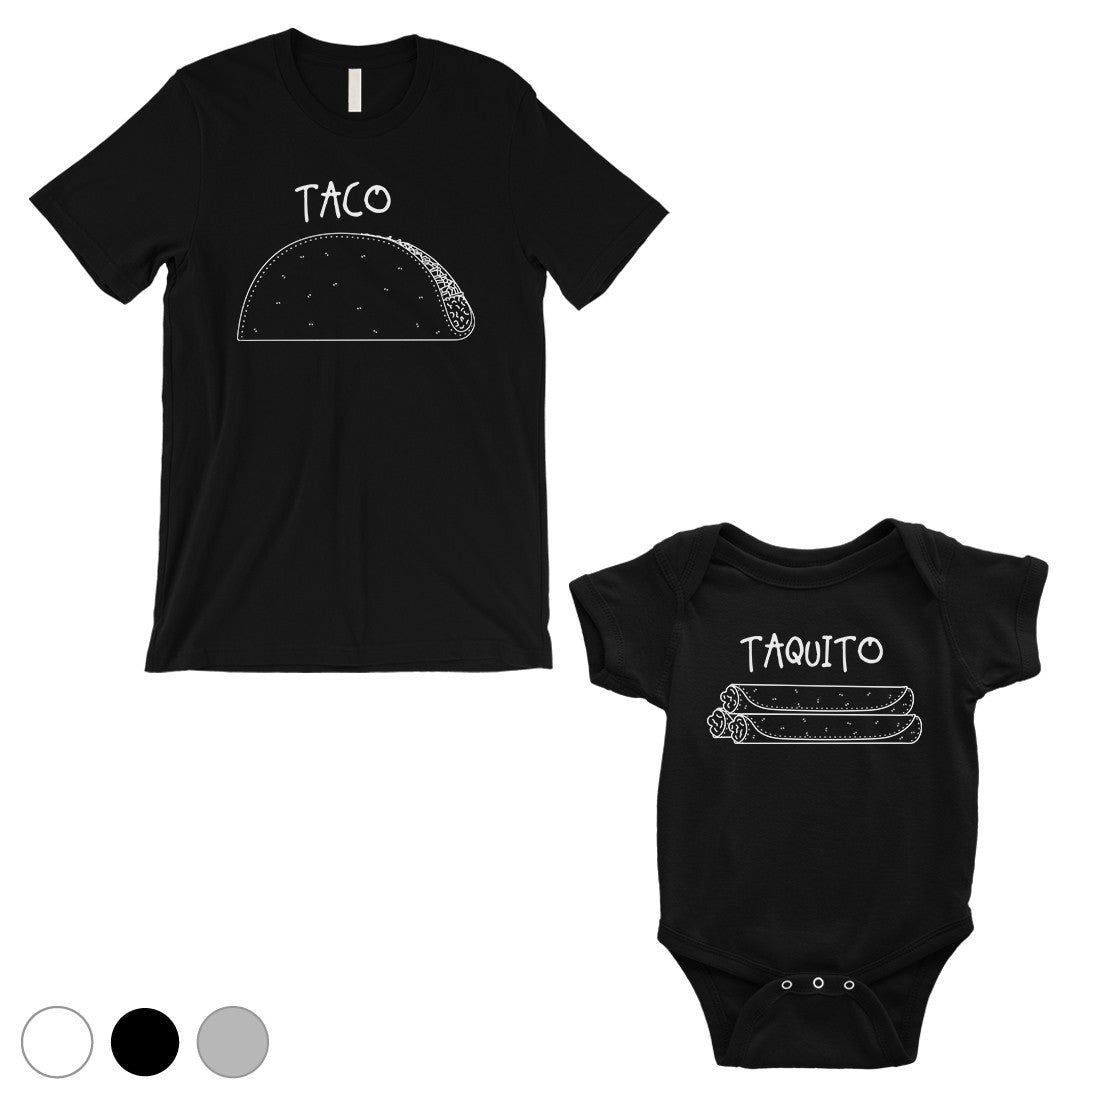 Taco Taquito Dad and Baby Matching Outfits Black